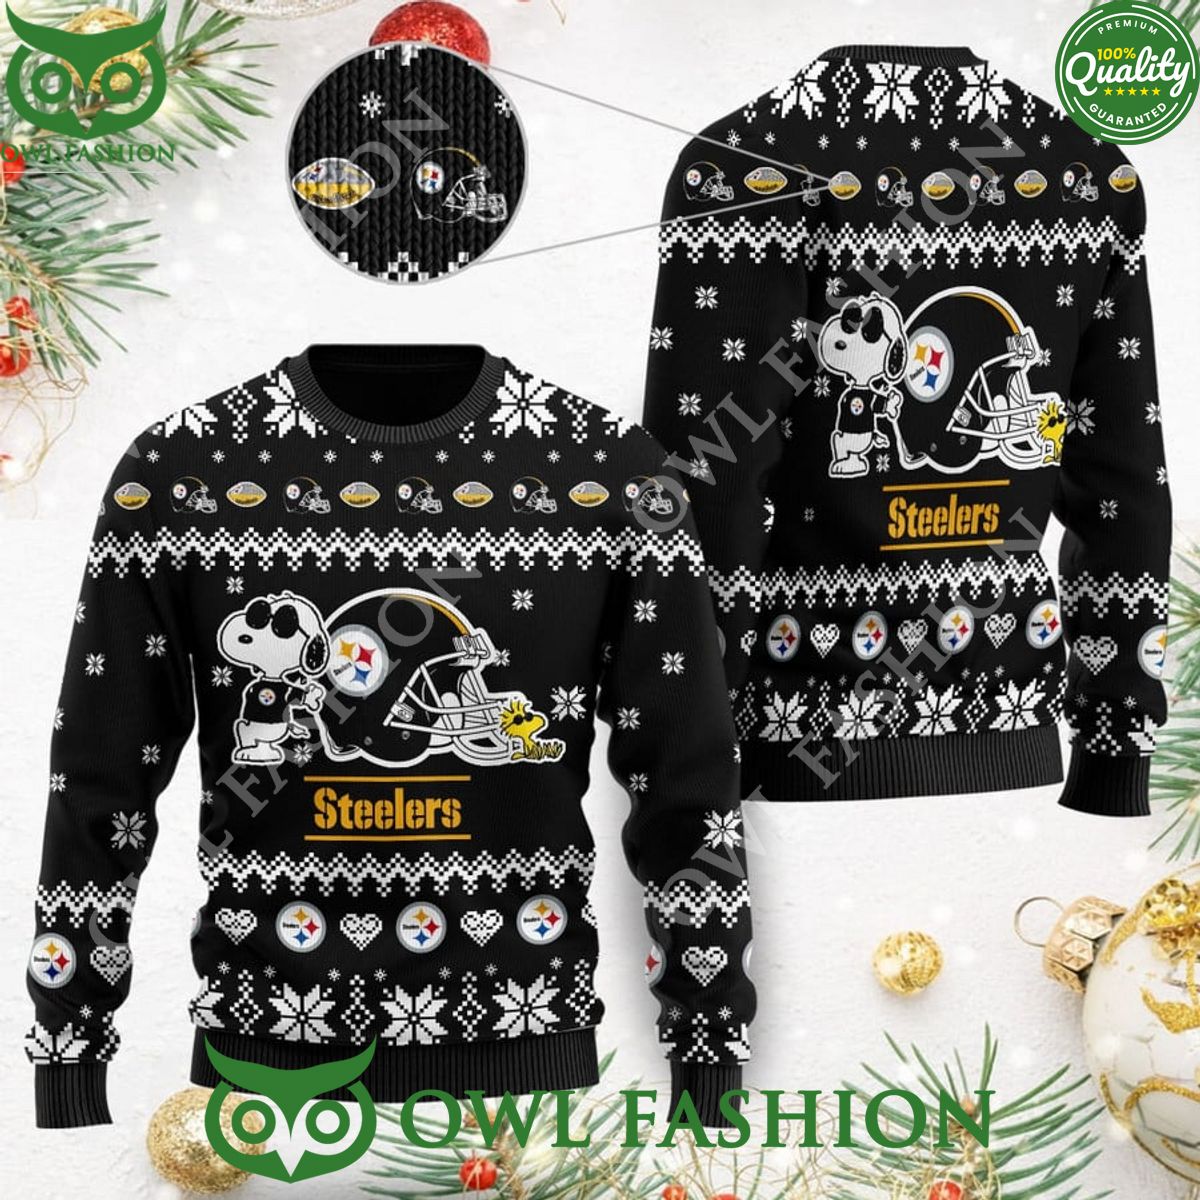 NFL Las Vegas Raiders Ugly Sweater,Ugly Sweater,NFL Sweater - Ingenious  Gifts Your Whole Family